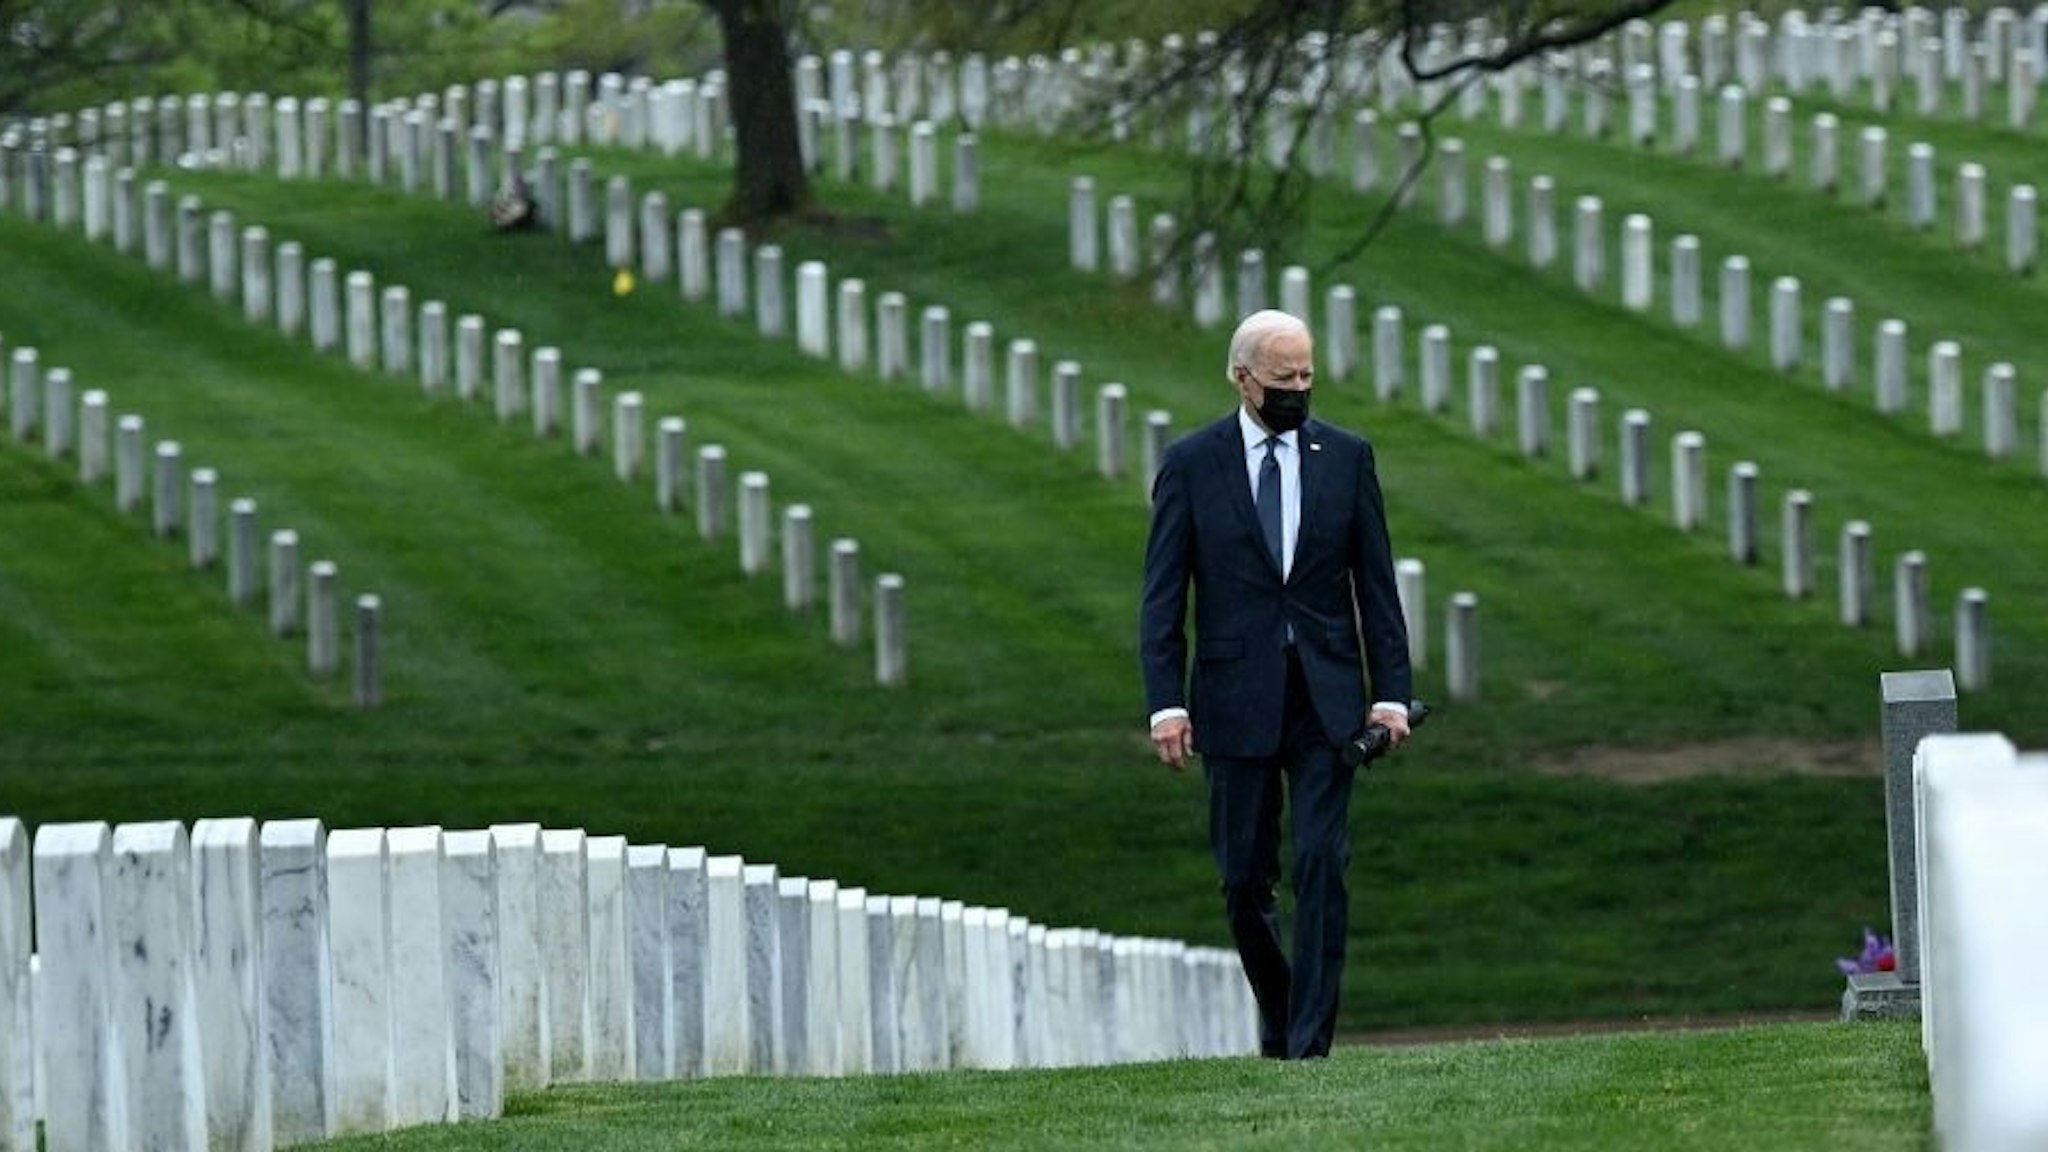 TOPSHOT - US President Joe Biden walks through Arlington National cemetary to honor fallen veterans of the Afghan conflict in Arlington, Virginia on April 14, 2021. - President Joe Biden announced it's "time to end" America's longest war with the unconditional withdrawal of troops from Afghanistan, where they have spent two decades in a bloody, largely fruitless battle against the Taliban. (Photo by Brendan SMIALOWSKI / AFP) (Photo by